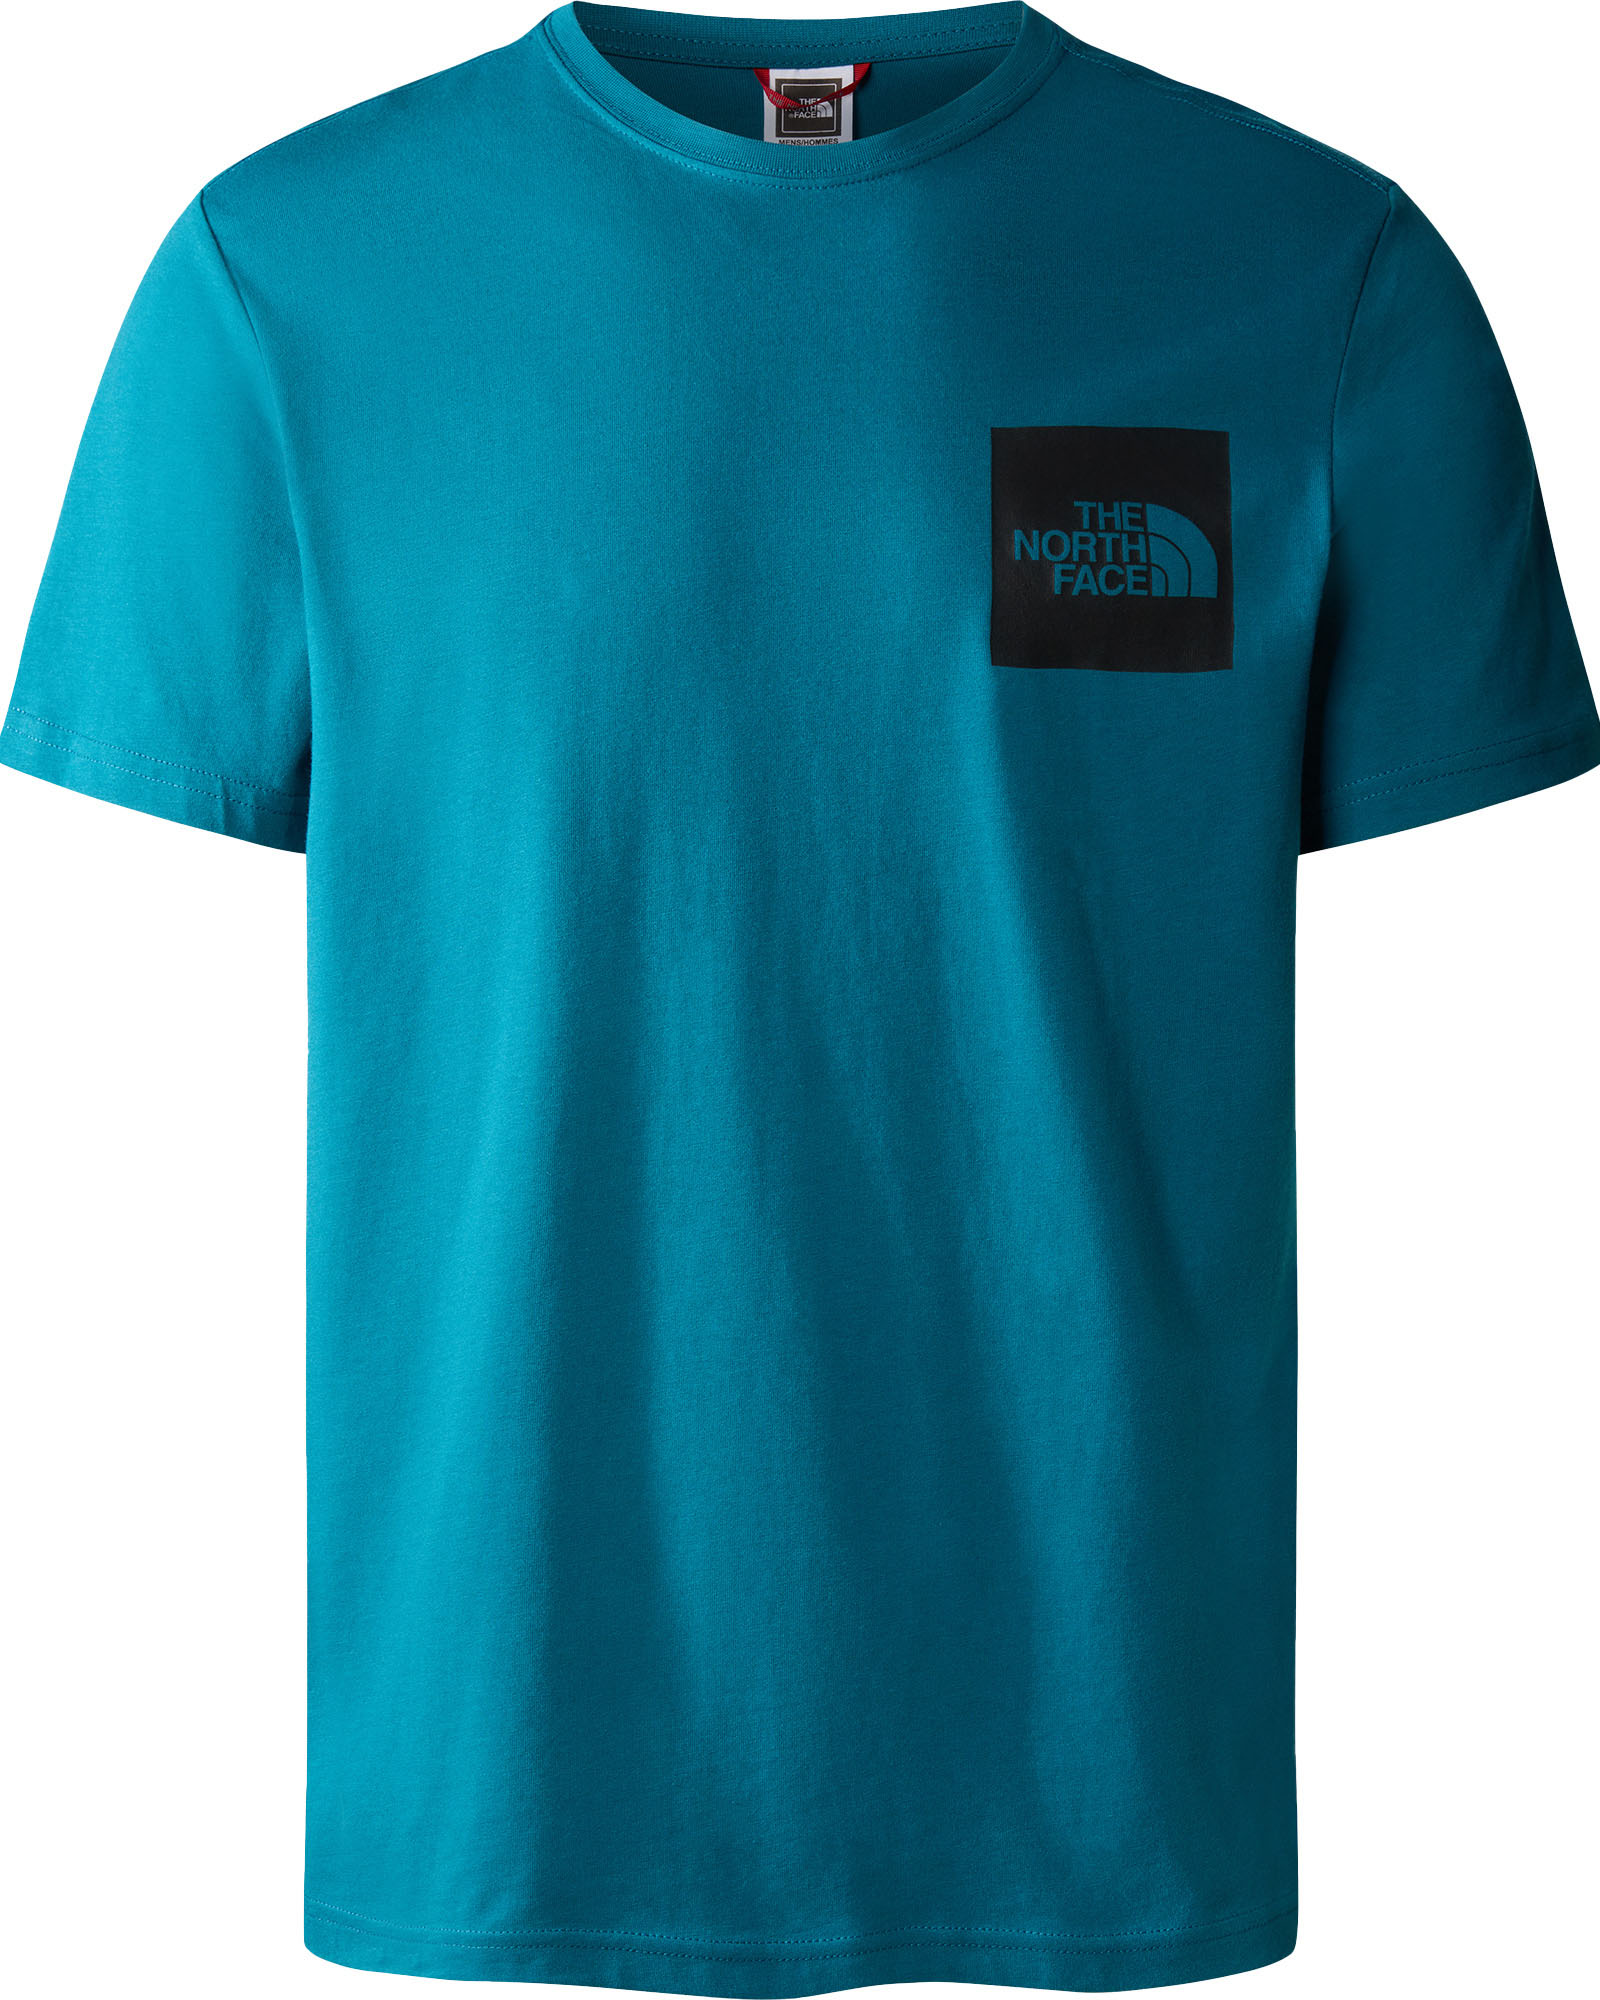 The North Face Fine Men’s Tee - Blue Coral S